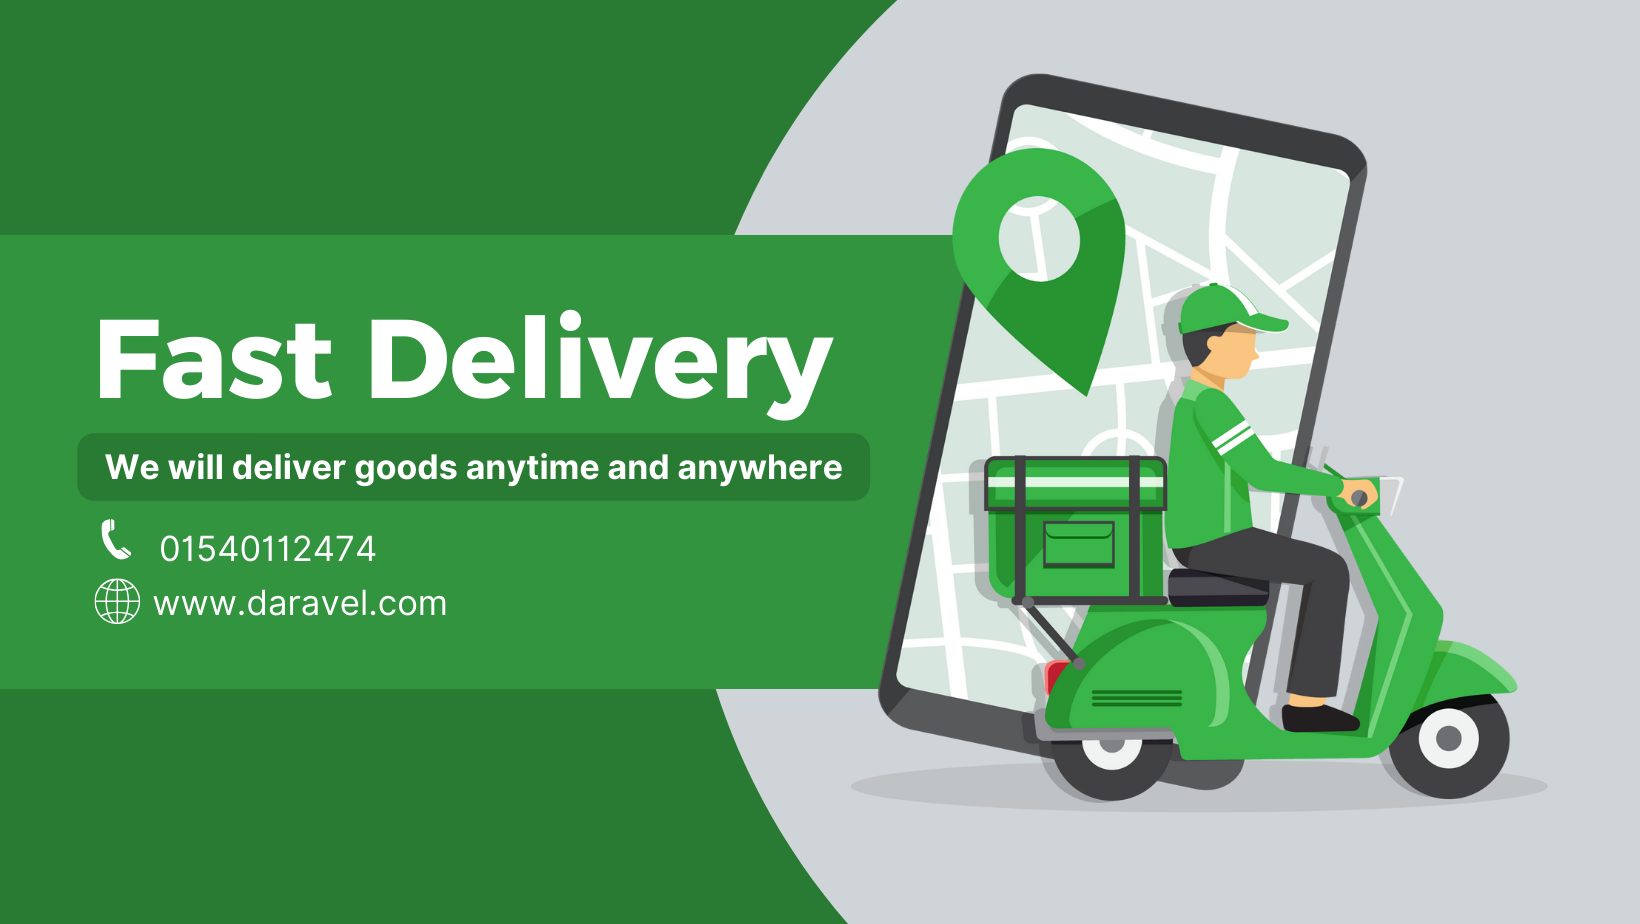 Green and White Illustration Minimalist Fast Delivery Facebook Cover - S497